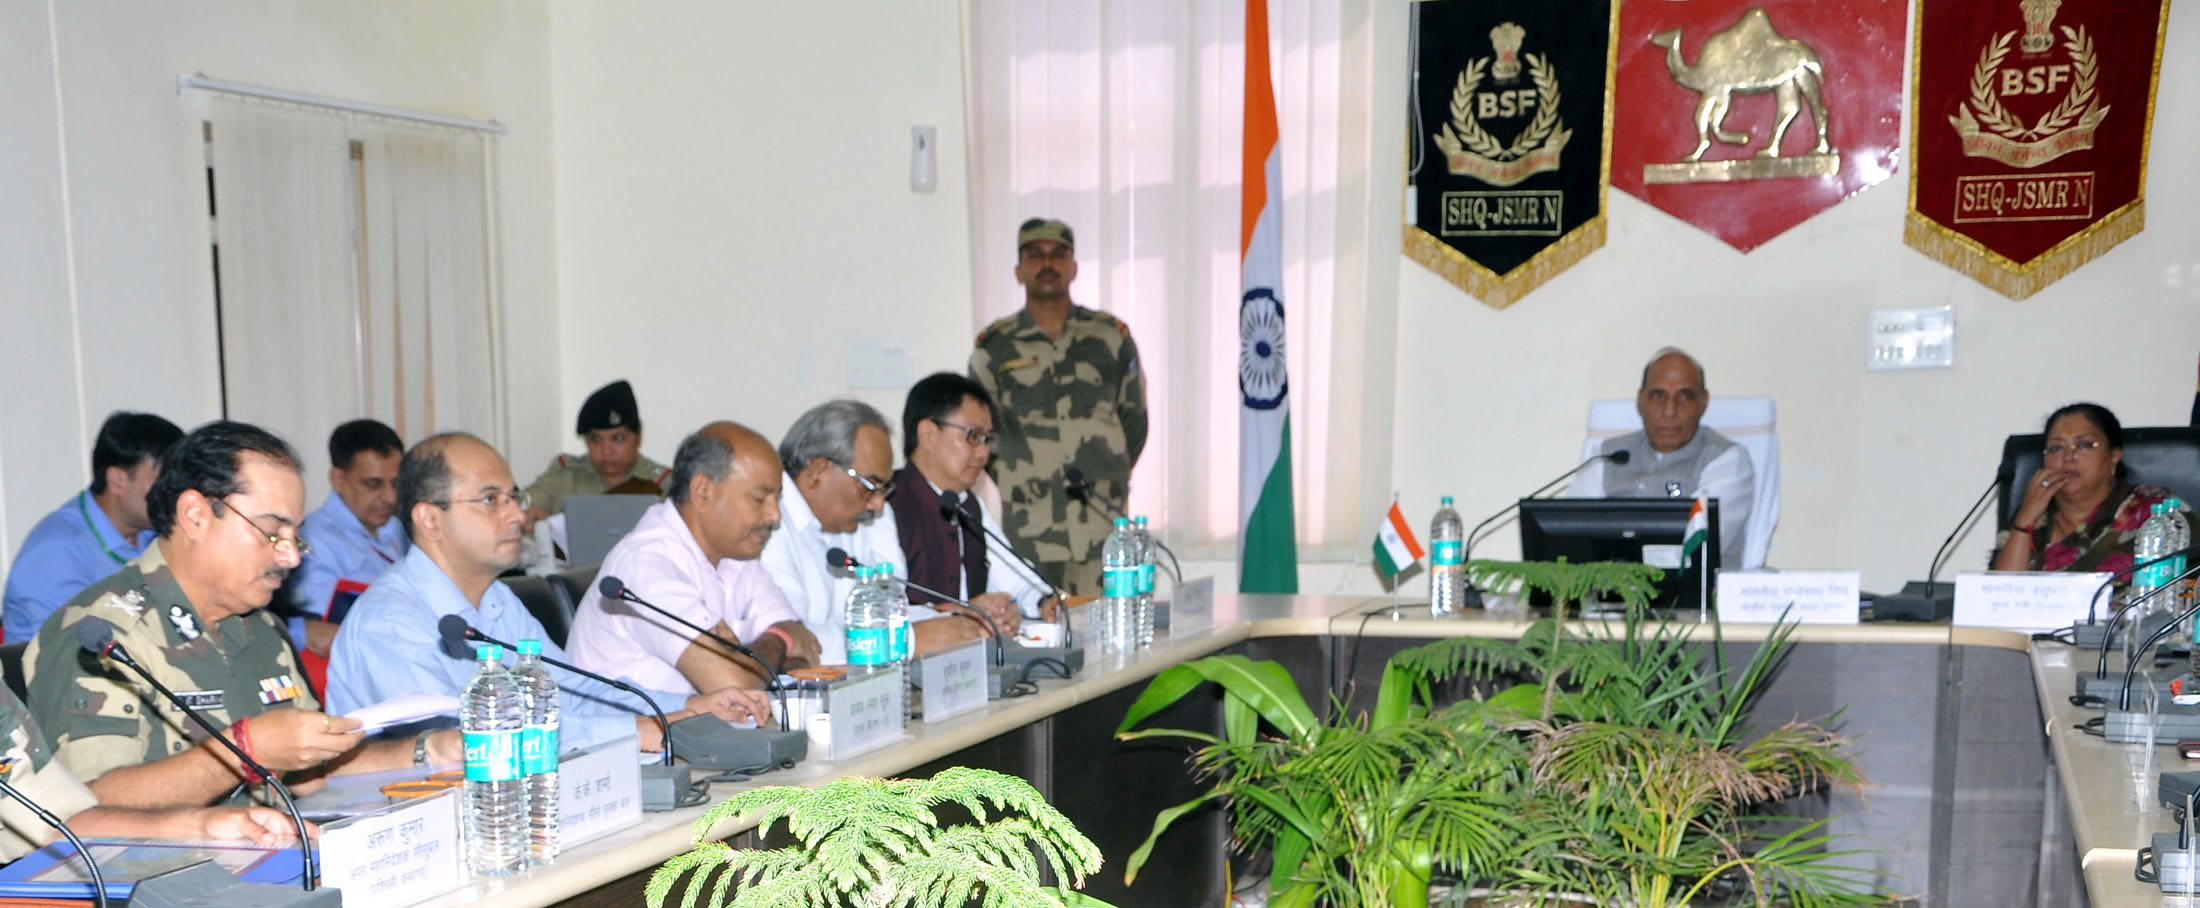 The Union Home Minister, Shri Rajnath Singh chairing a meeting with the Chief Ministers/ Home Ministers of Rajasthan, Gujarat, Punjab & J&K for sealing of Indo-Pak border, in Jaisalmer on October 07, 2016. The Chief Minister of Rajasthan, Smt. Vasundhara Raje Scindia, the Minister of State for Home Affairs, Shri Kiren Rijiju, the Union Home Secretary, Shri Rajiv Mehrishi, the Secretary (Border Management), Shri Susheel Kumar and senior officers of MHA and BSF are also seen.